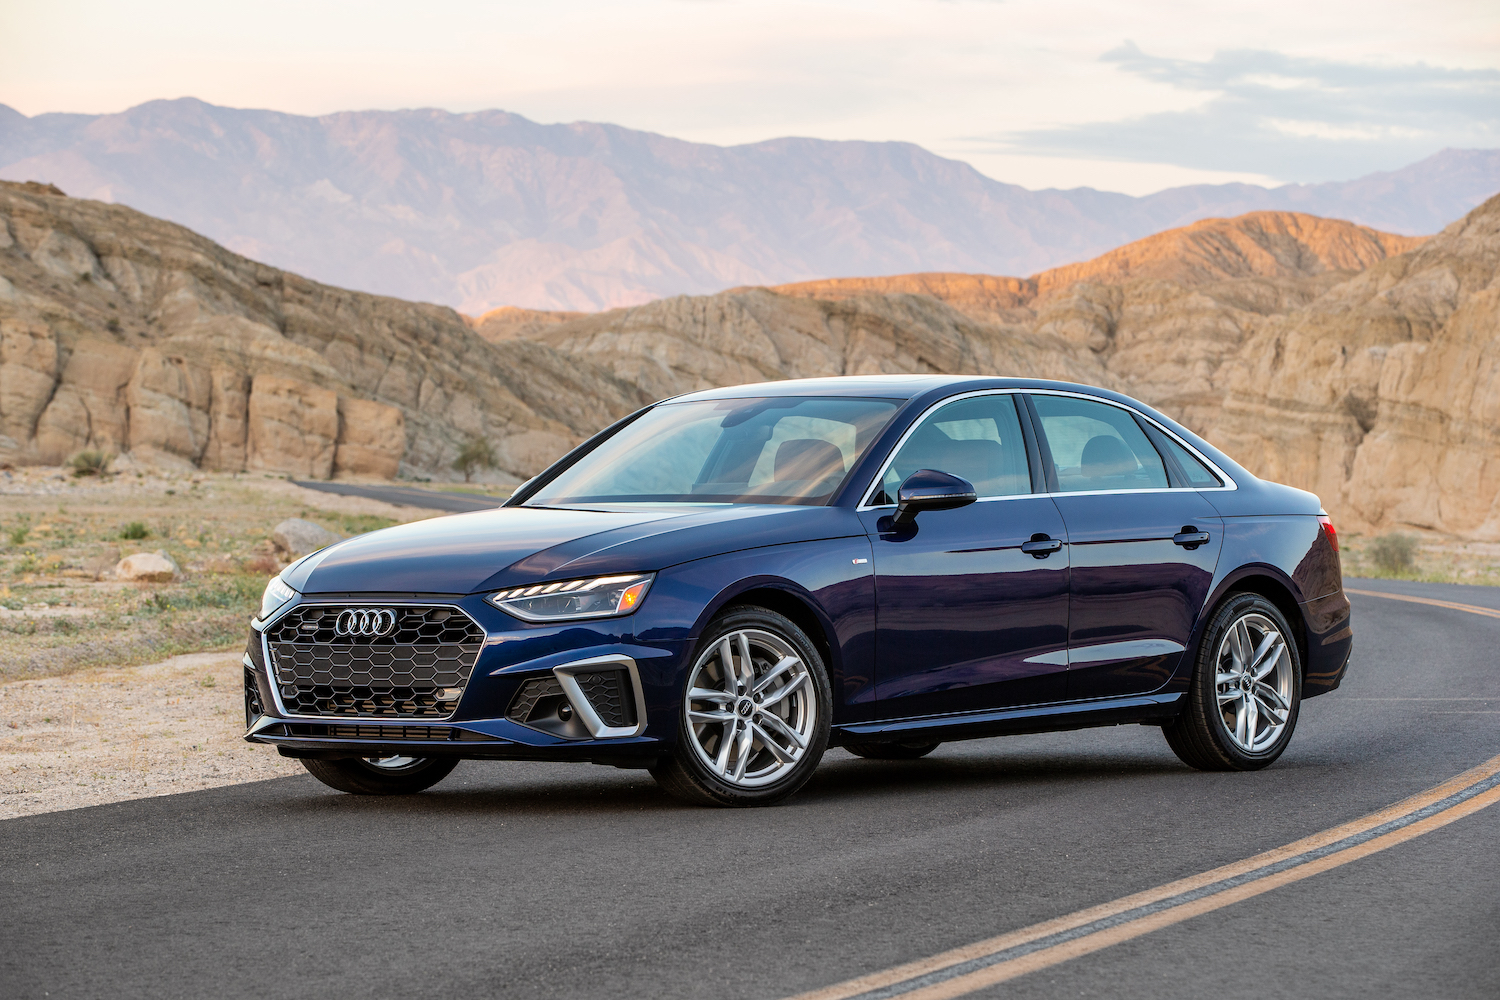 A 2021 Audi A4 parked in the mountains, the 2021 Audi A4 is one of the best luxury sedans under $40K